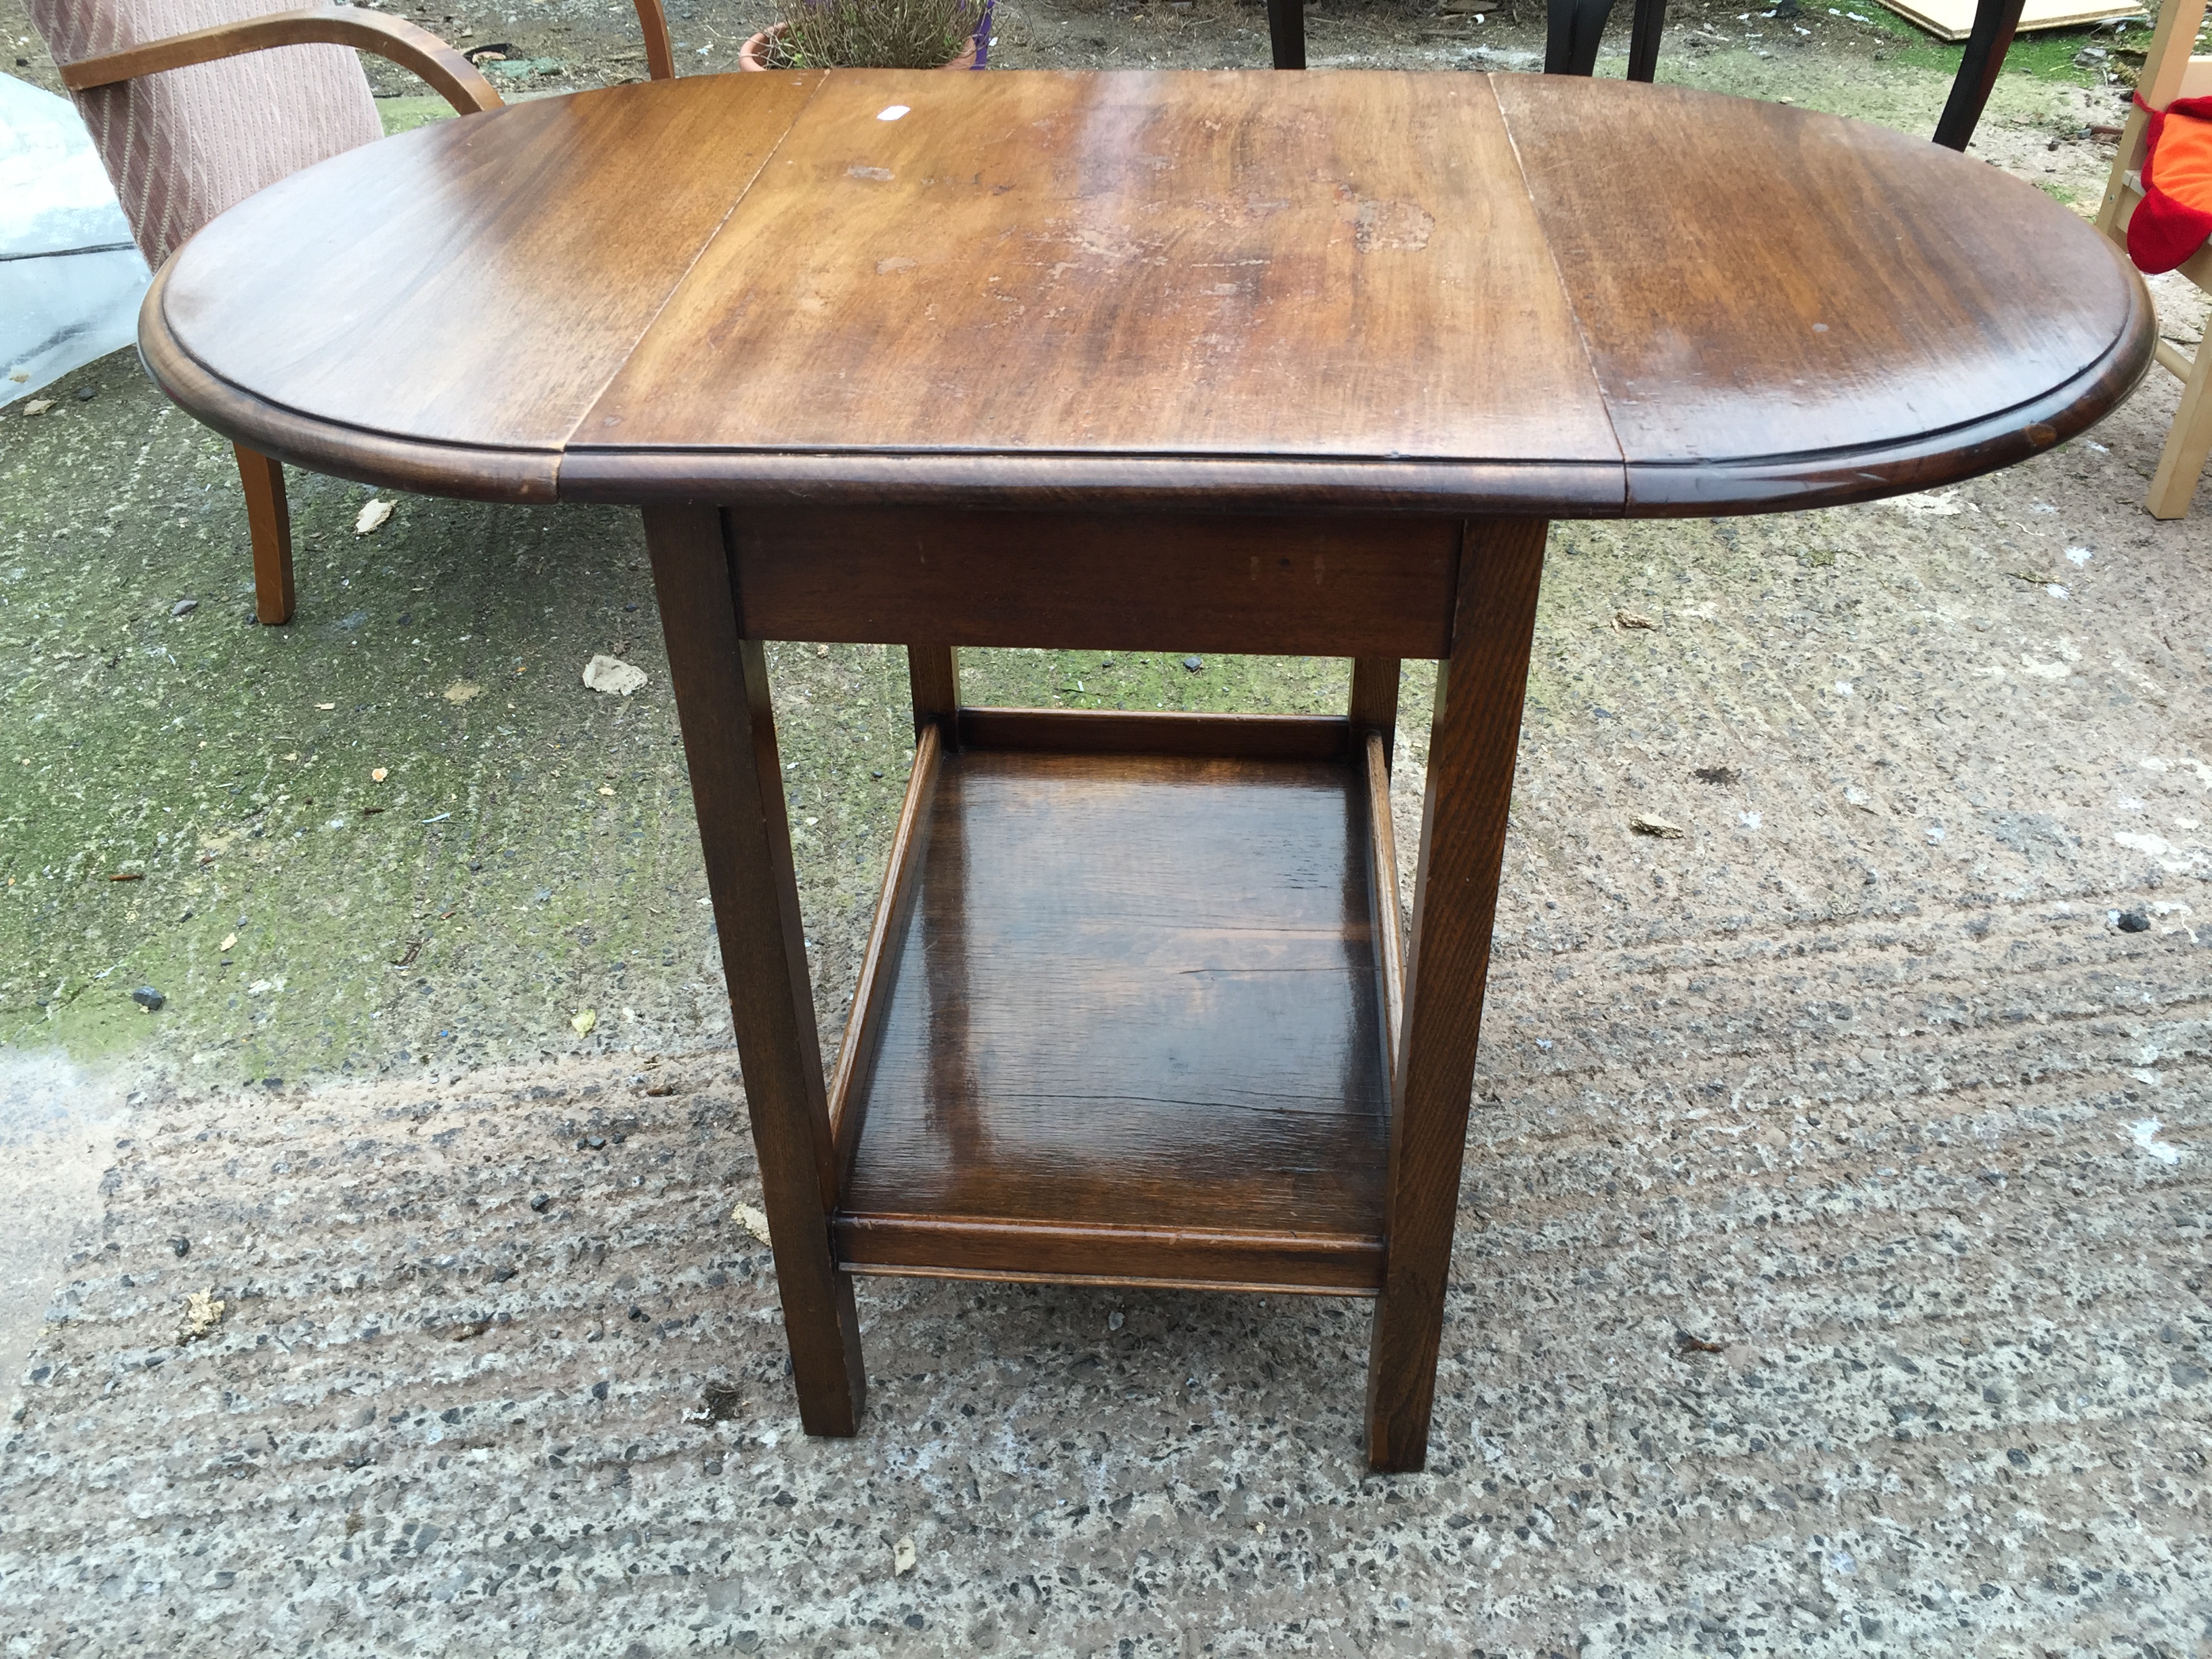 A drop leaf side table with shelf. - Image 2 of 2